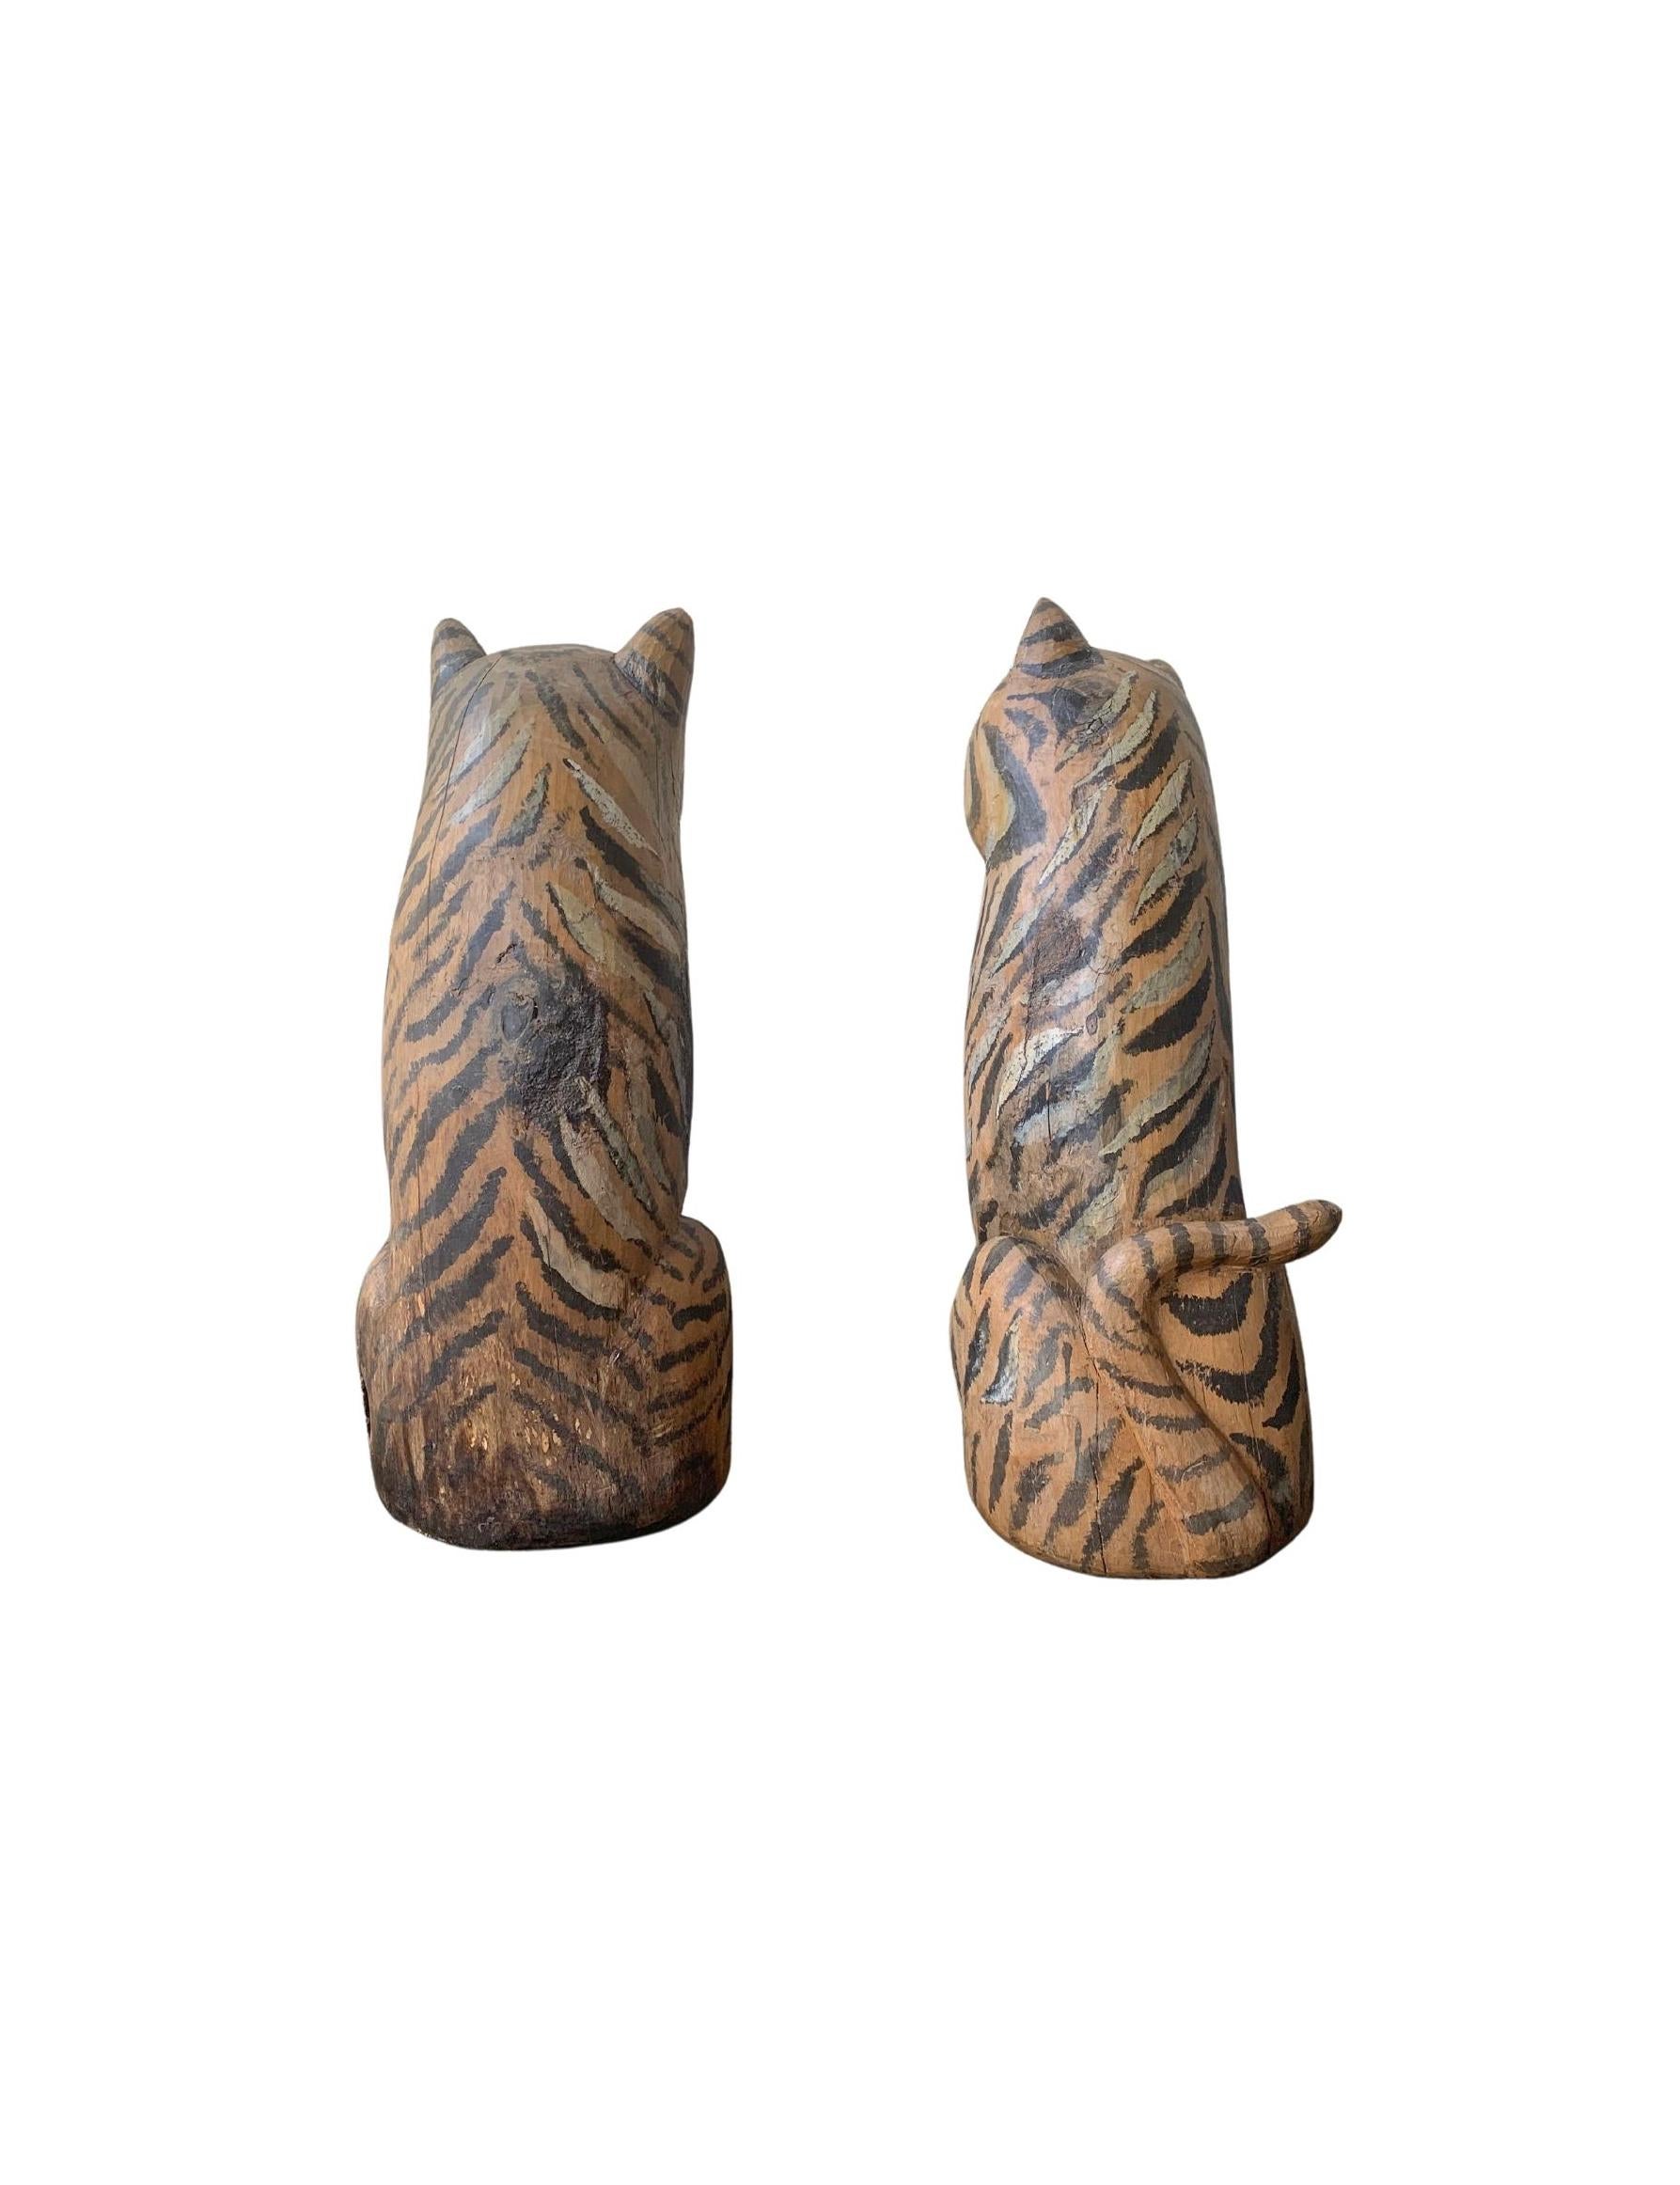 Hand-Carved Pair of Vintage Hand-Crafted Tiger Sculpture / Statue from Java, Indonesia  For Sale